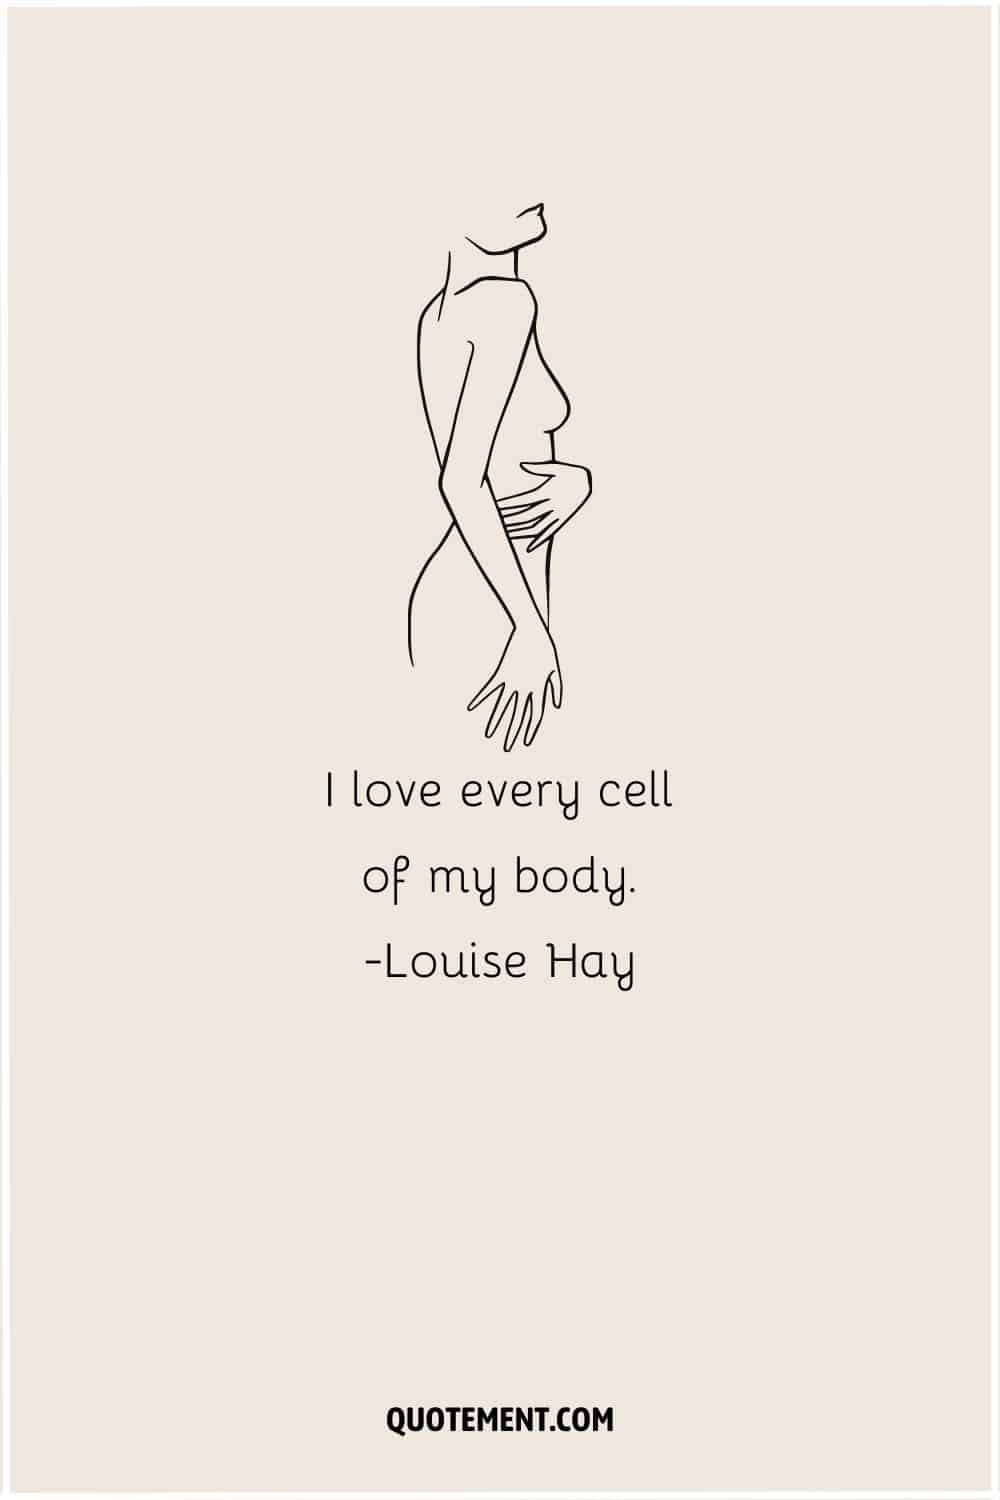 Illustration of a woman representing the most powerful body positivity quote.
